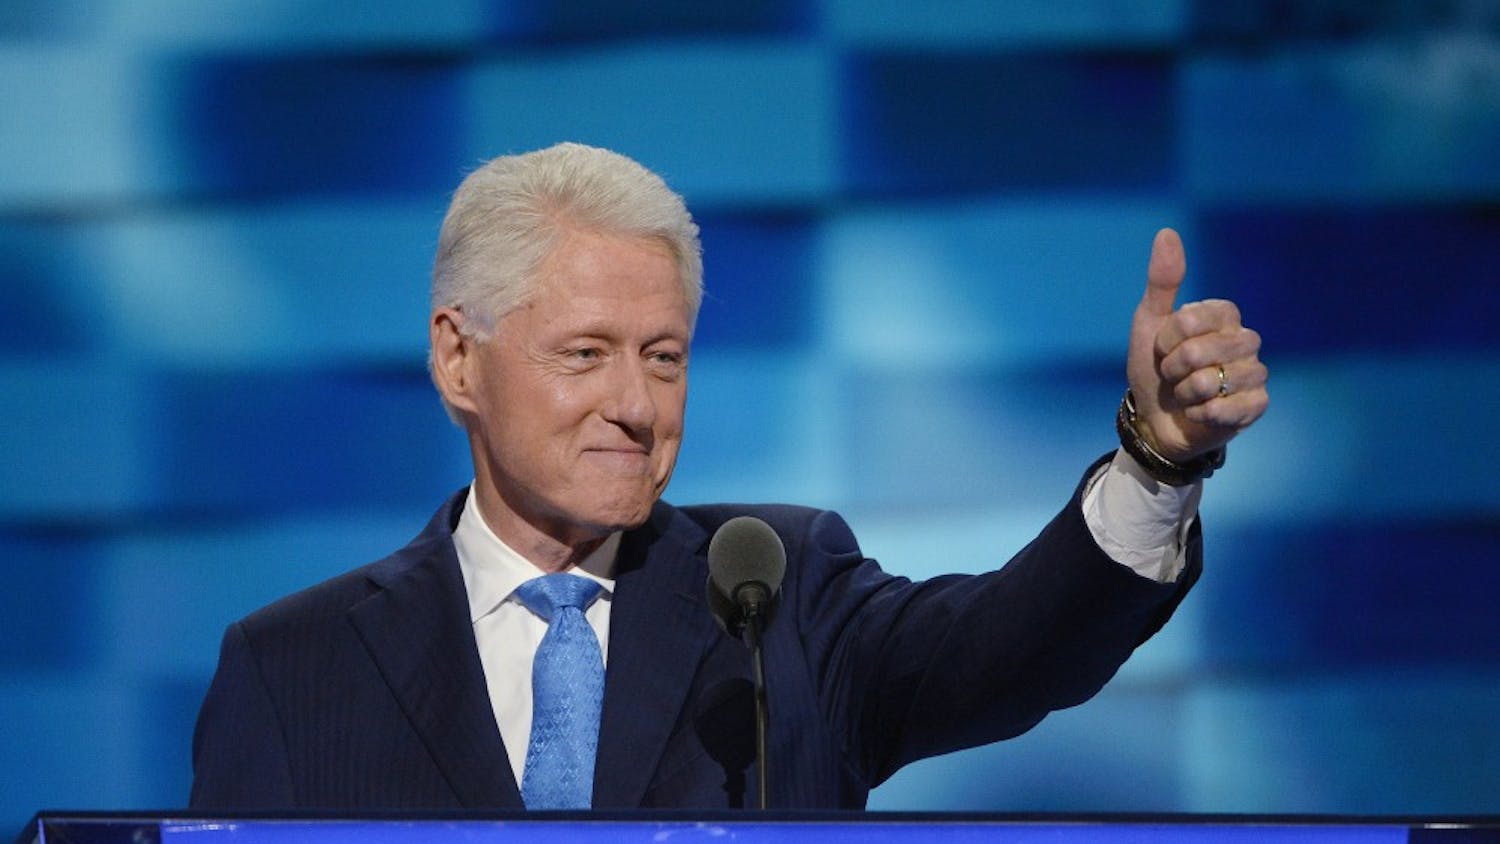 President Bill Clinton speaks during the second day of the Democratic National Convention on Tuesday, July 26, 2016, at the Wells Fargo Center in Philadelphia. (Olivier Douliery/Abaca Press/TNS)